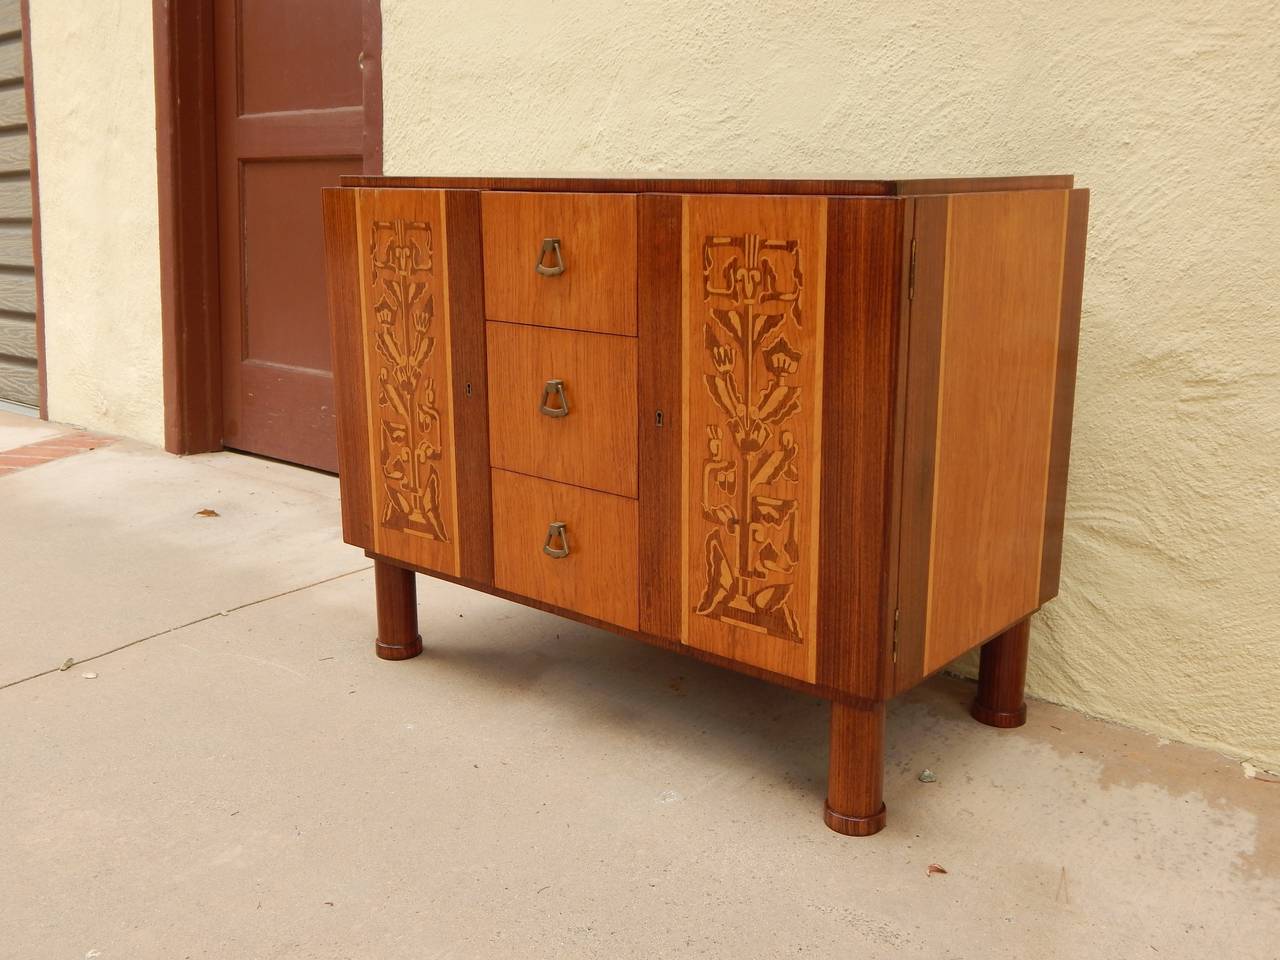 Swedish Art Deco era inlaid dresser, cabinet or hall piece by Erik Chambert.
Composed of rosewood, elm, flame birch and pear wood. Interior composed of storage cabinets with removable shelves and three drawers with original bronze pulls. Made at